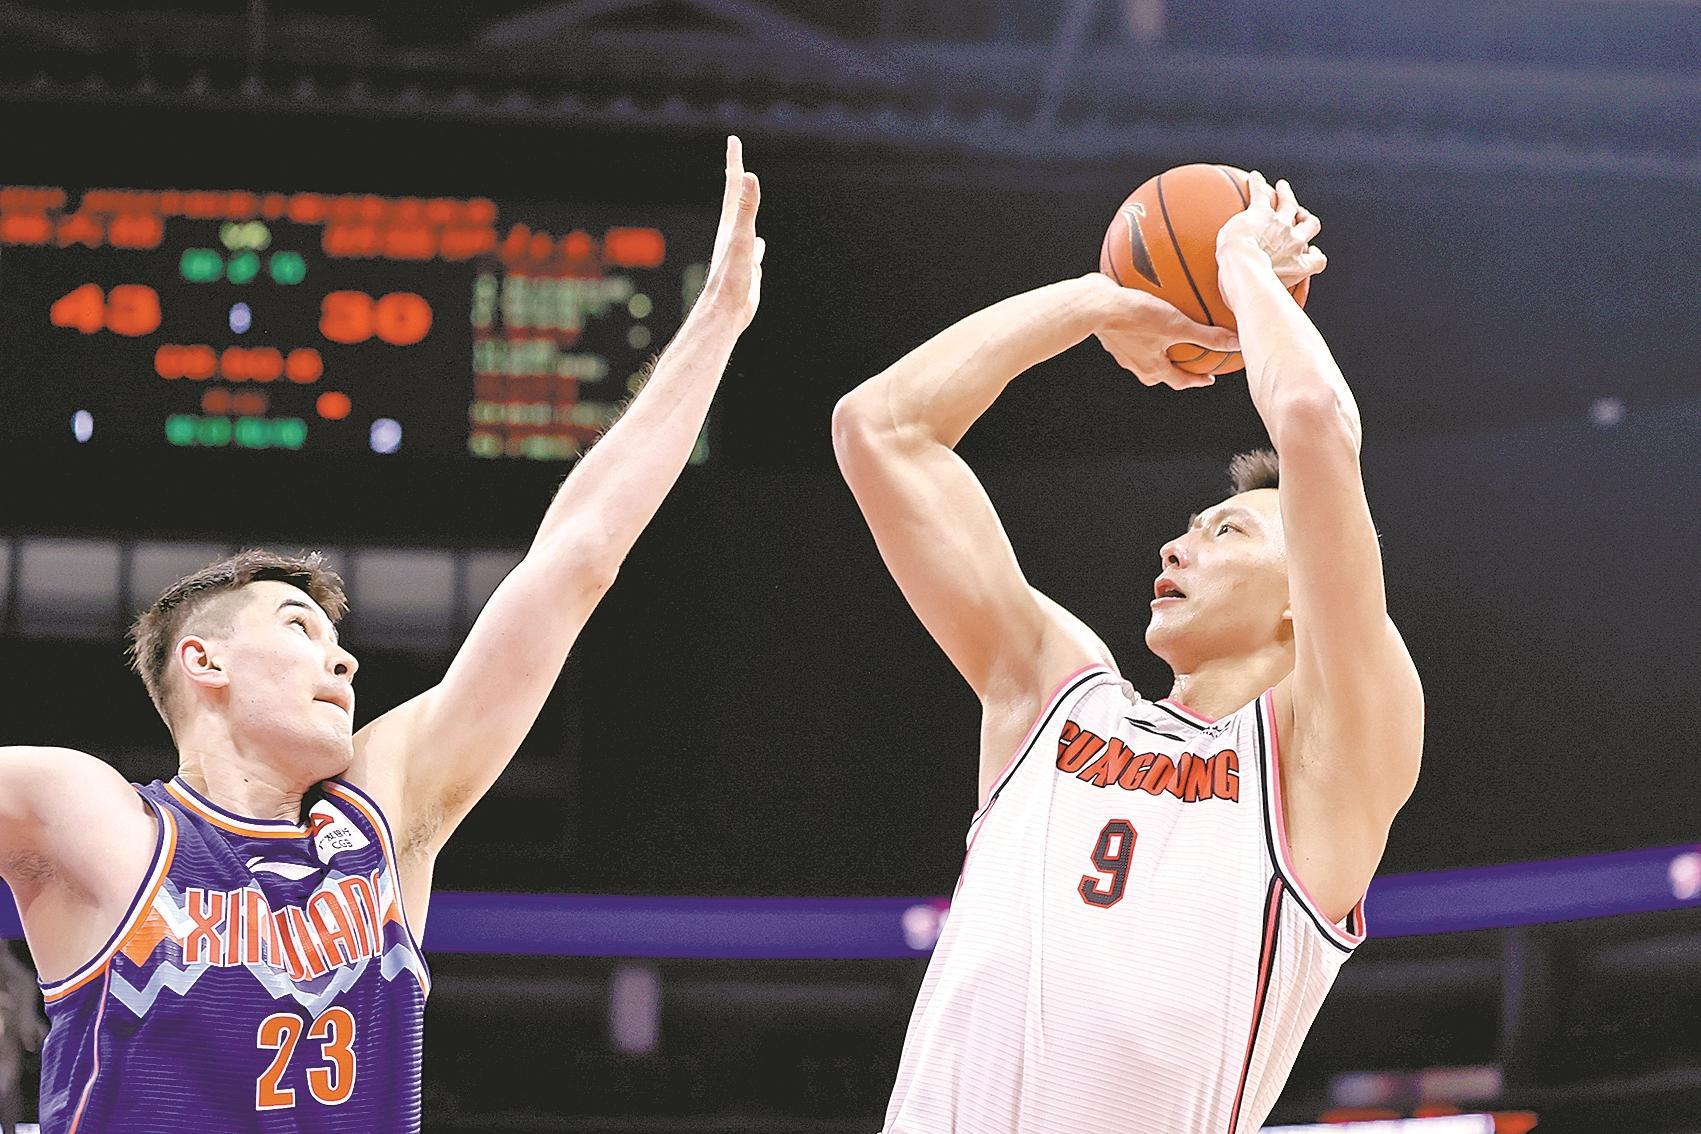 Guangdong men's basketball team ushered in three consecutive victories, all playoff teams were produced